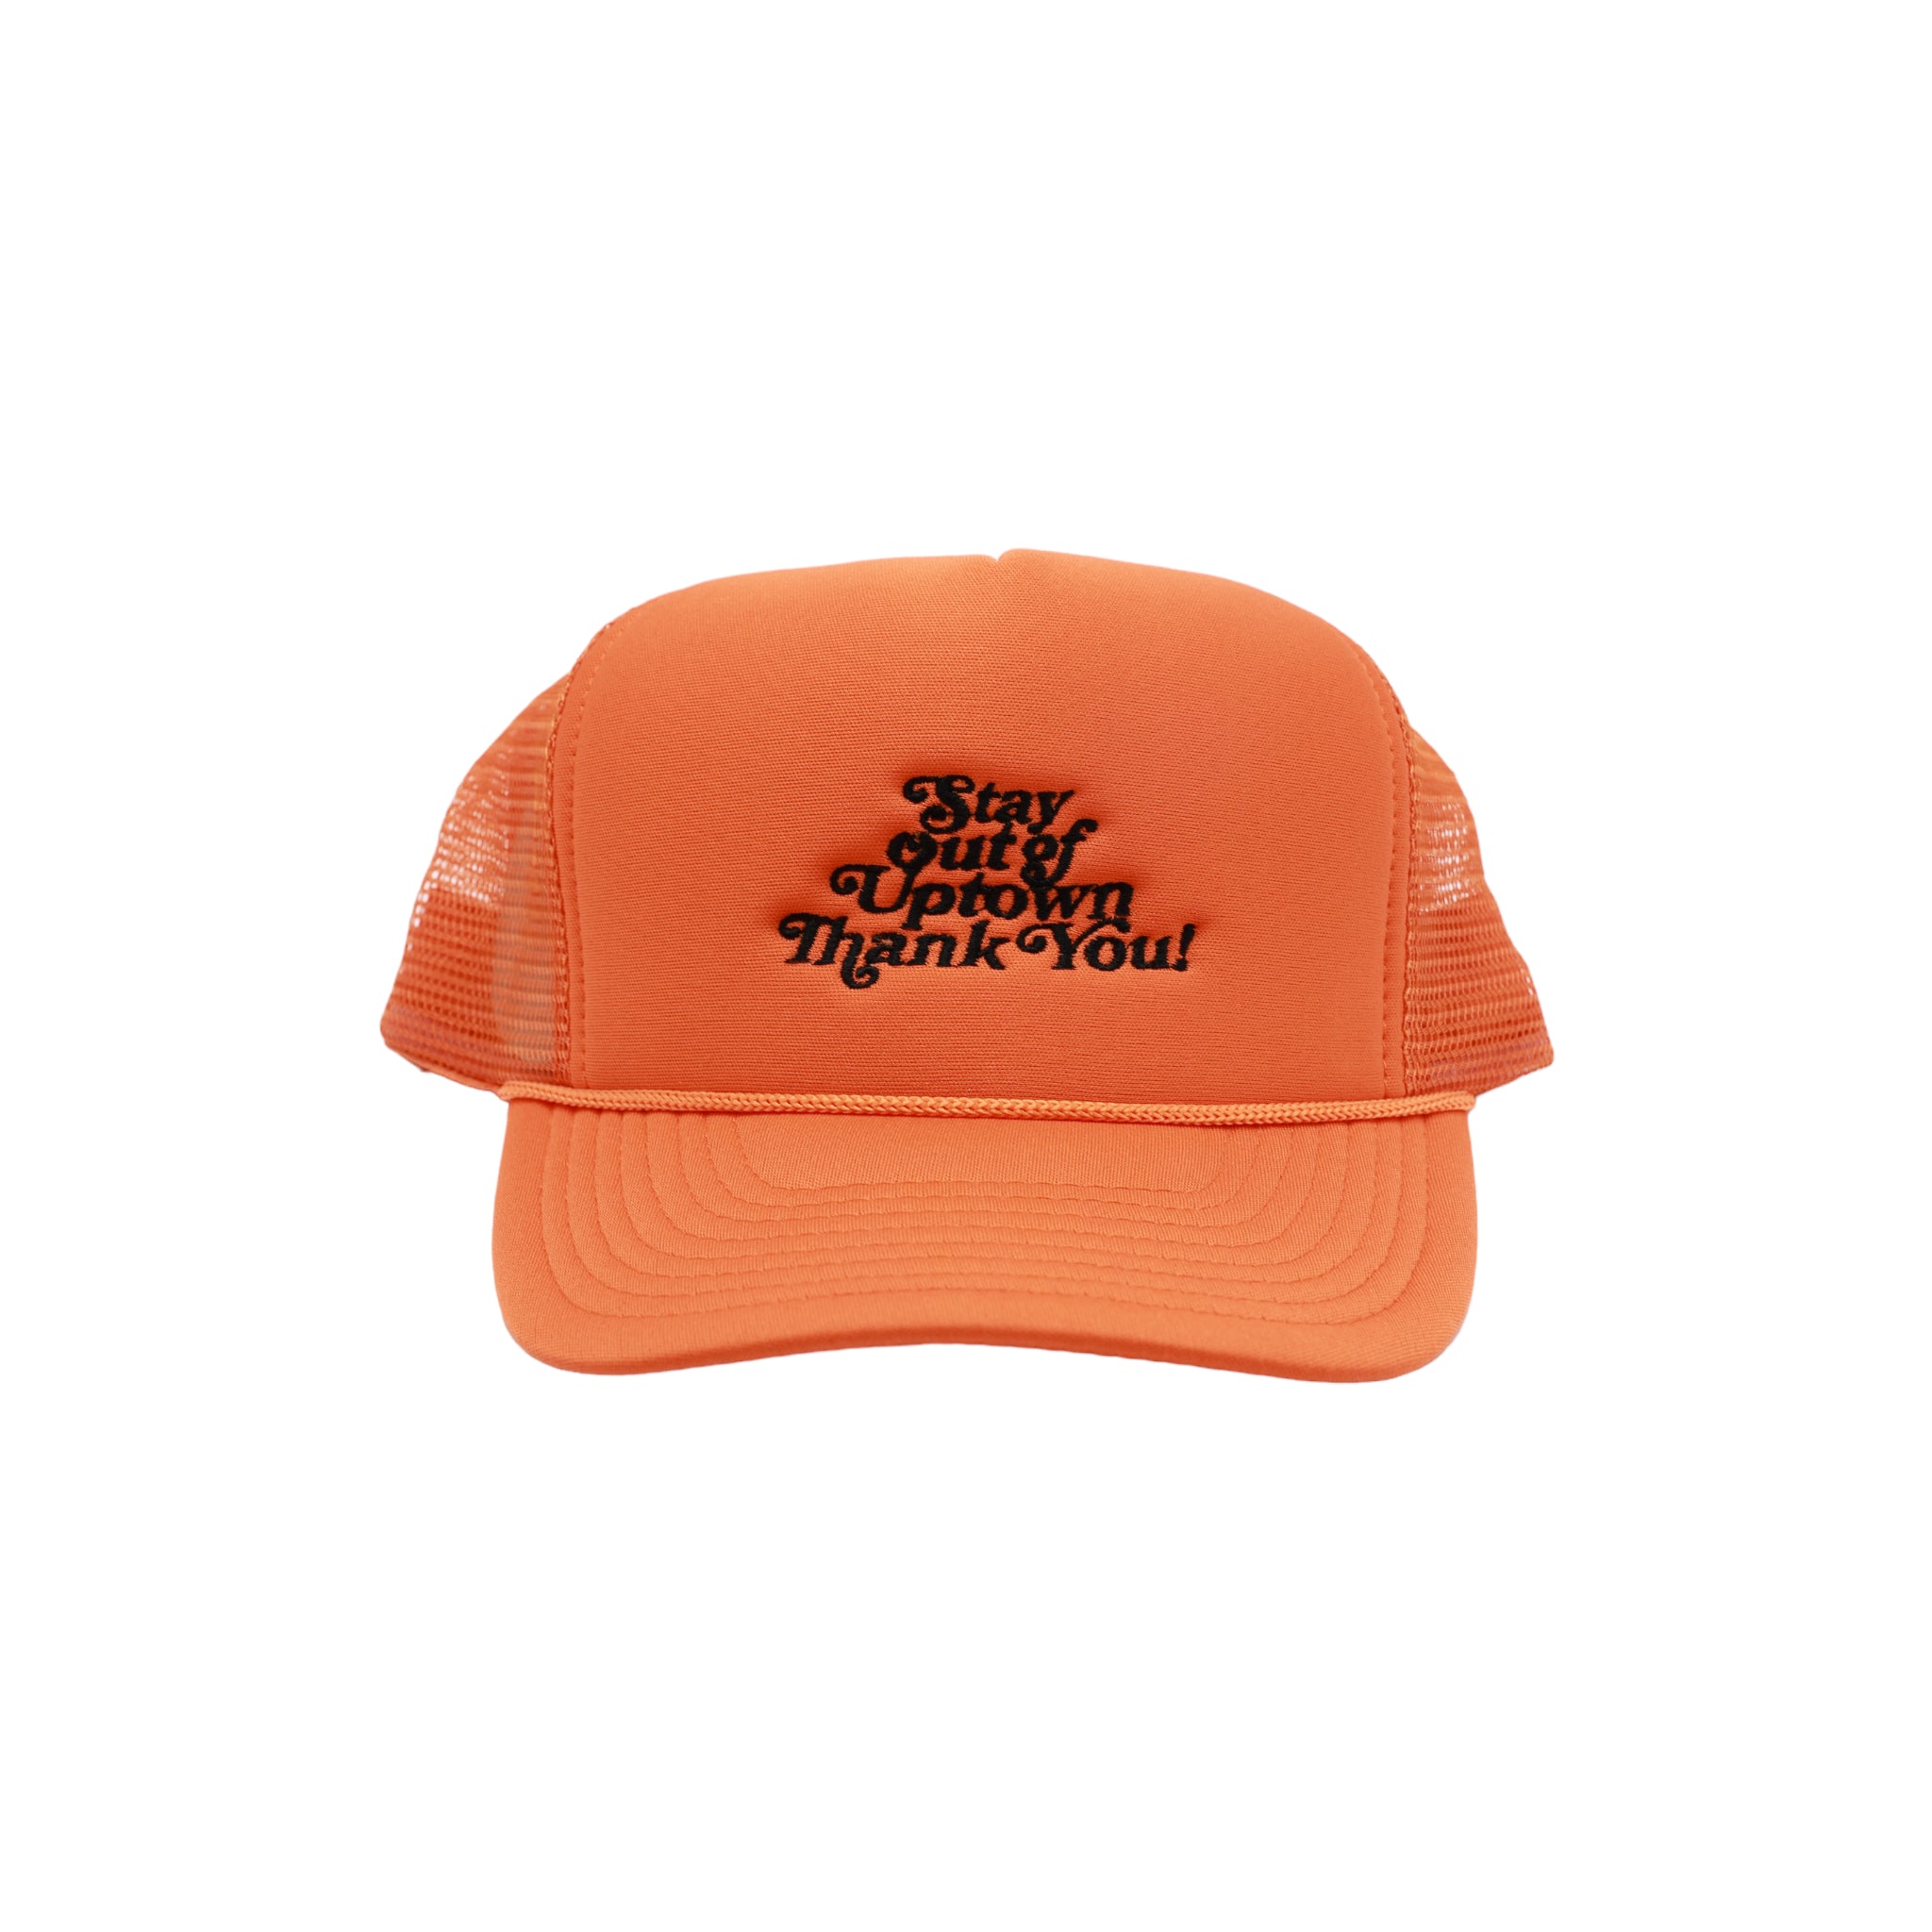 Stay Out Of Uptown - Trucker Cap Orange (1 of 1)